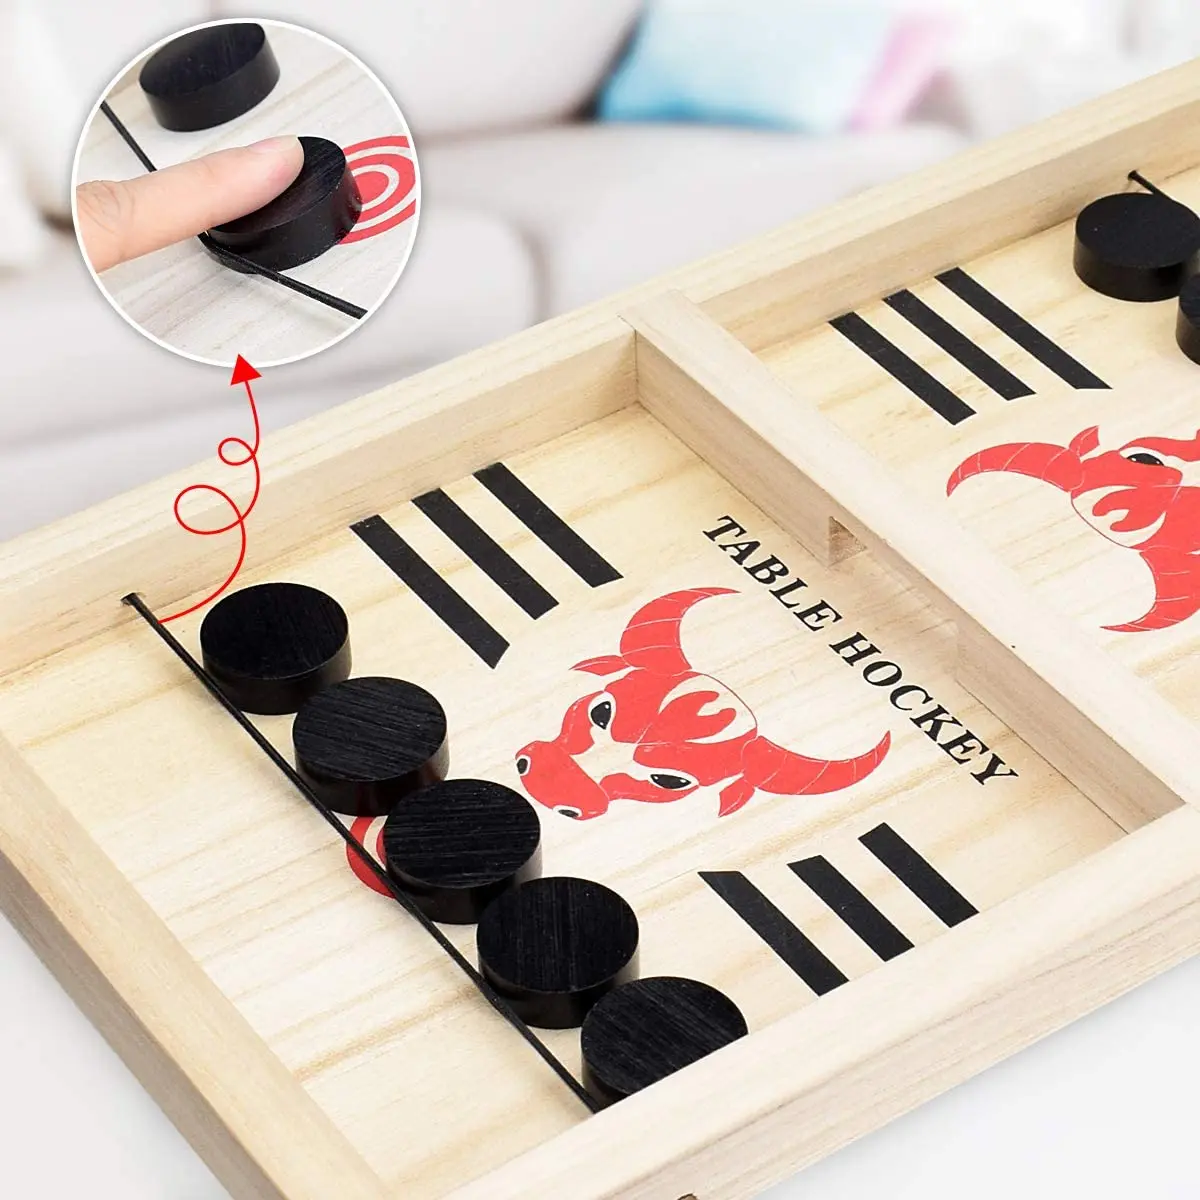 Portable Hockey Game Set for Family Party Birthday Gift Sundlight Table Desktop Ice Hockey Head-to-Head Wooden Desktop Hockey Table Game for Kids and Adults 